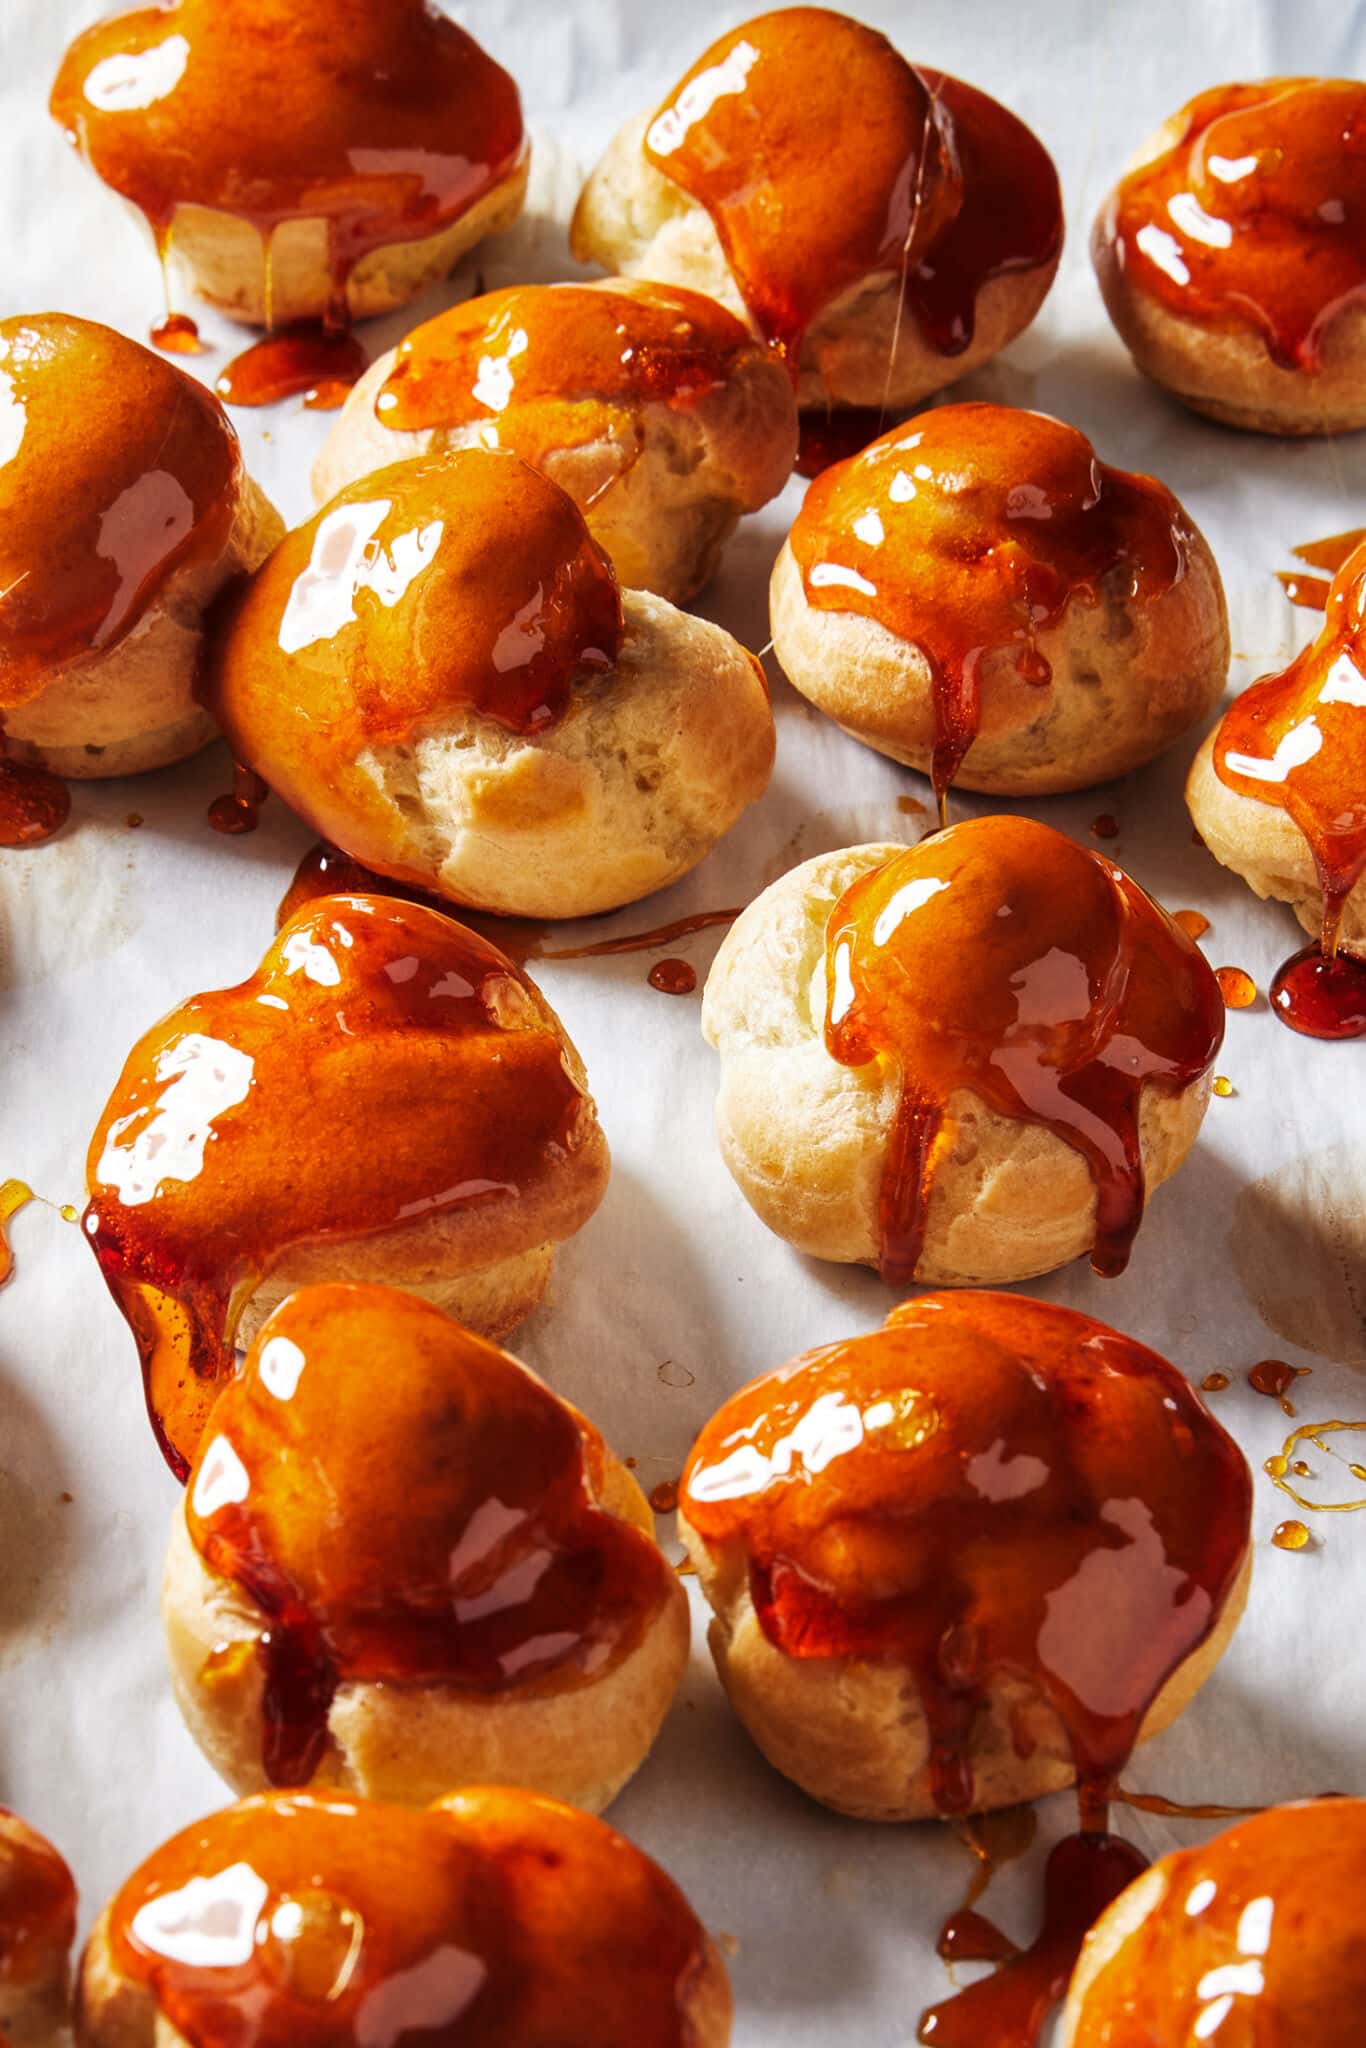 Profiteroles covered in sticky caramel